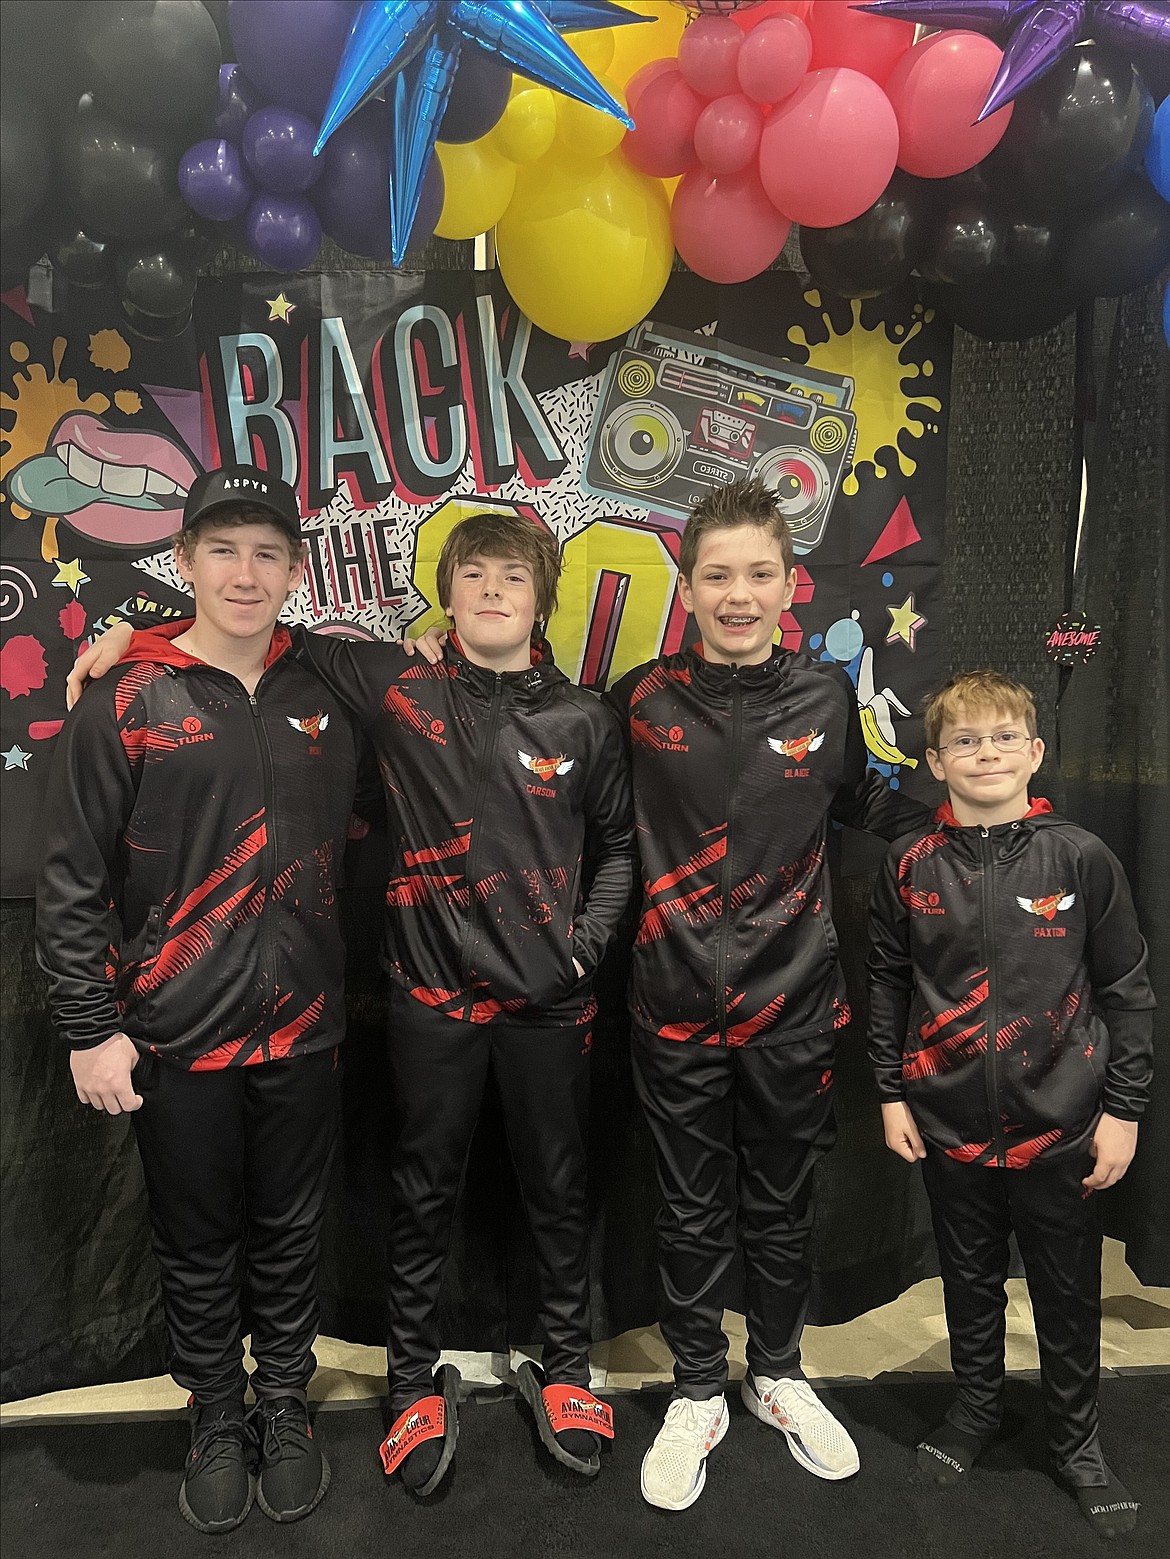 Courtesy photo
Avant Coeur Gymnastics Level 5s and 7s at the Idaho State Championships in Boise. Level 7s took 3rd Place Team. From left are Ricky Parker, Carson Kenny, Blaide Cotten and Paxton Wenegler.